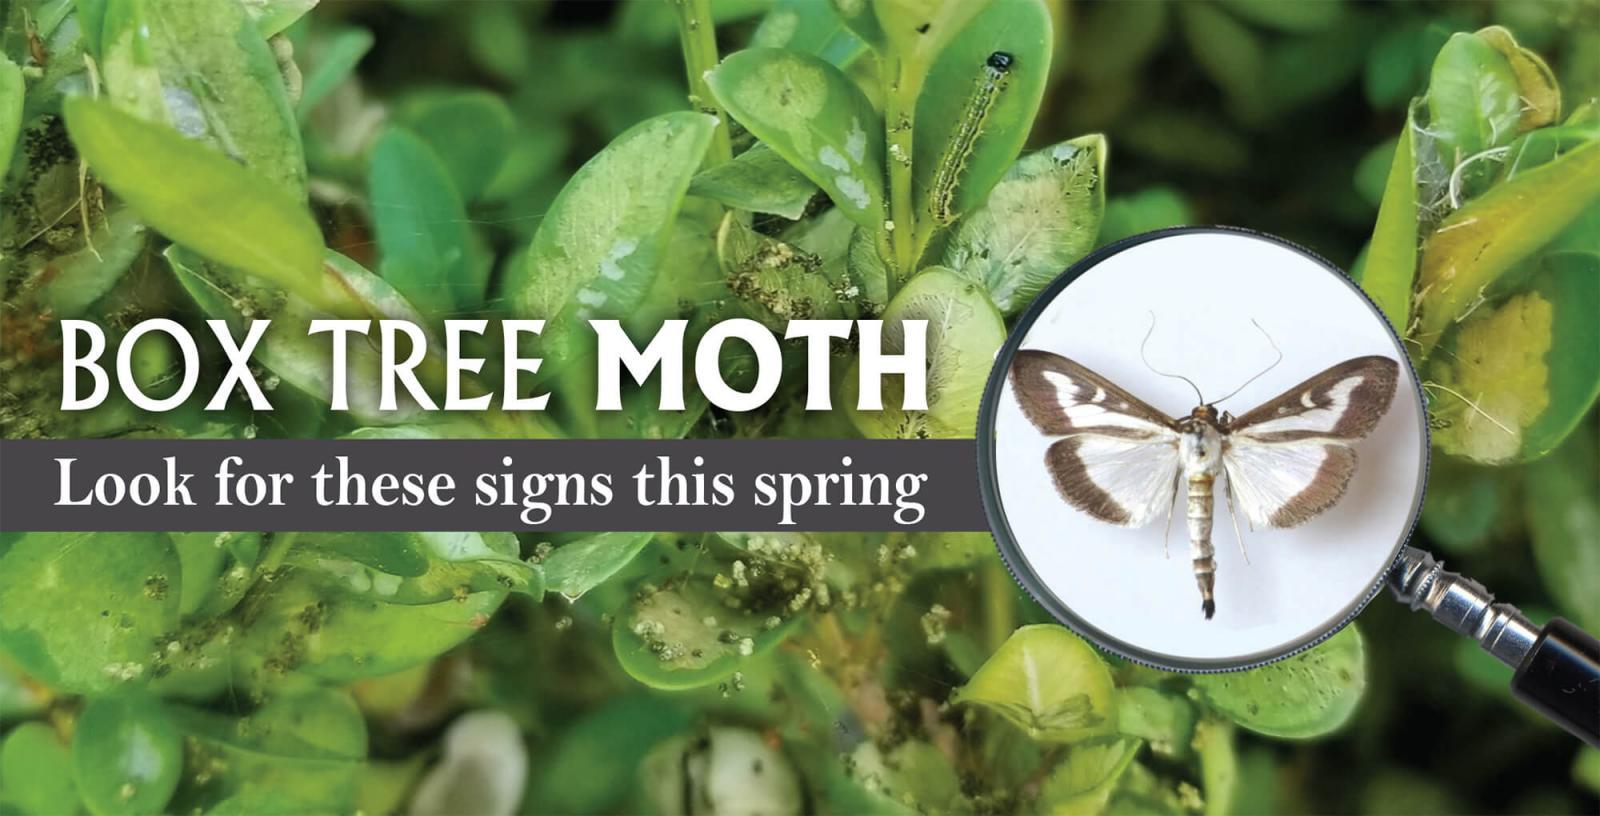 Box tree moth: Look for these signs this spring